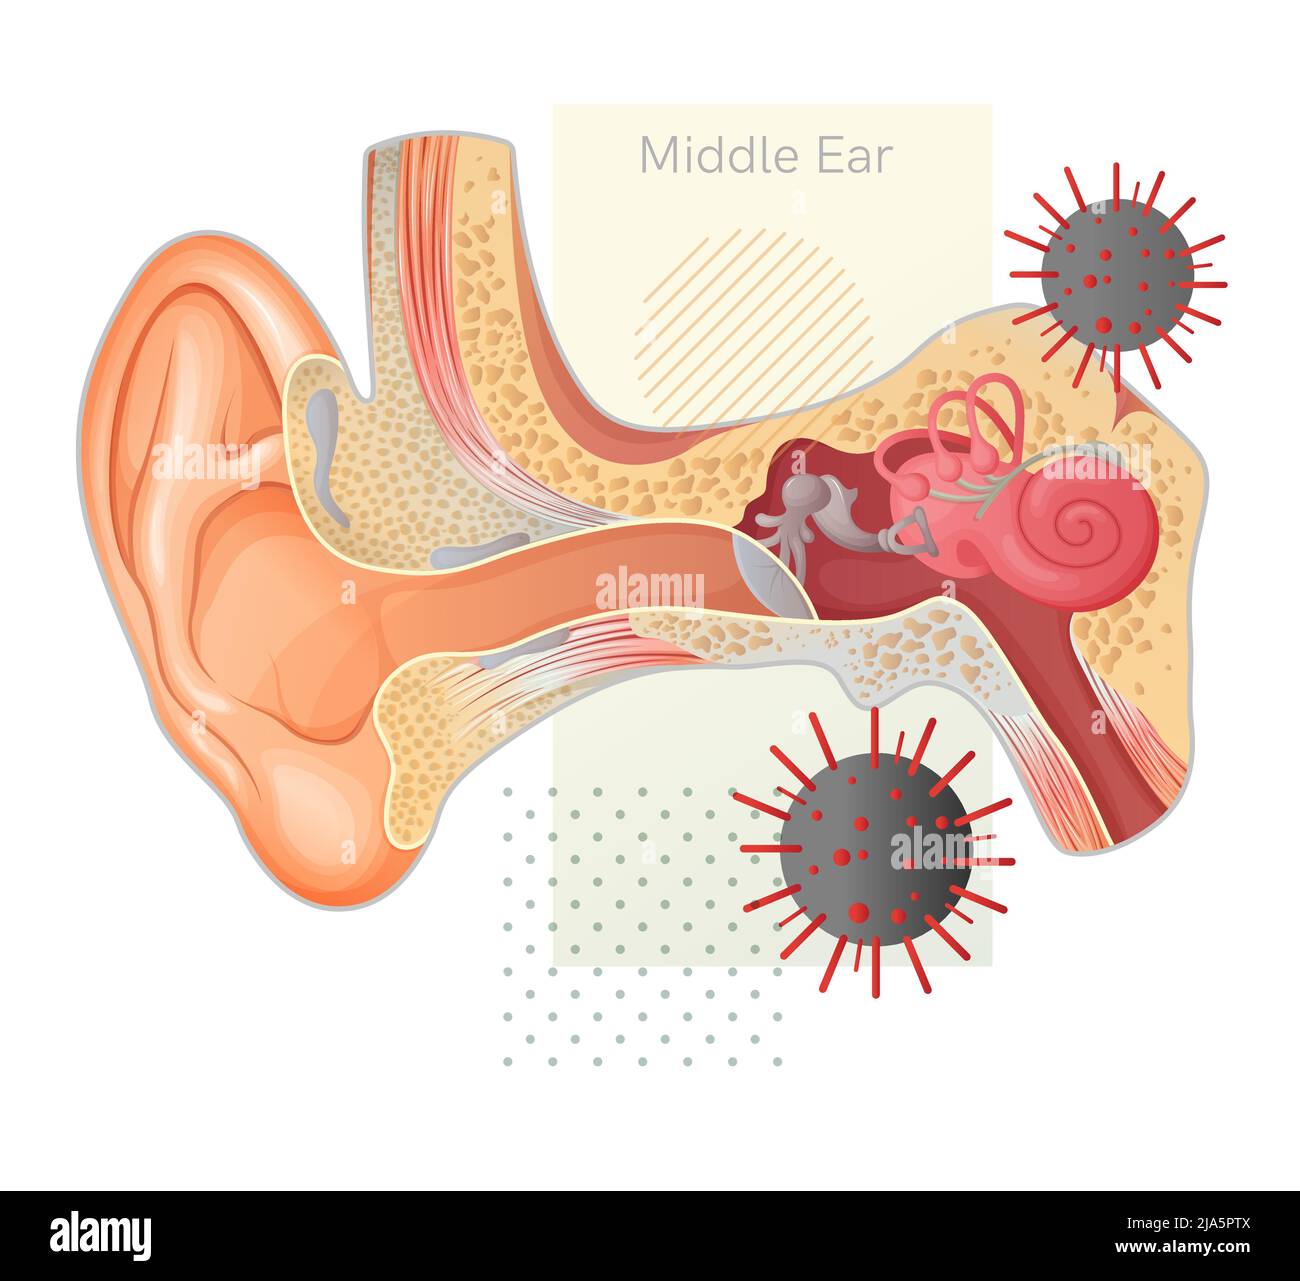 Covid Impact on Human Ear - Stock Illustration  as EPS 10 File Stock Vector